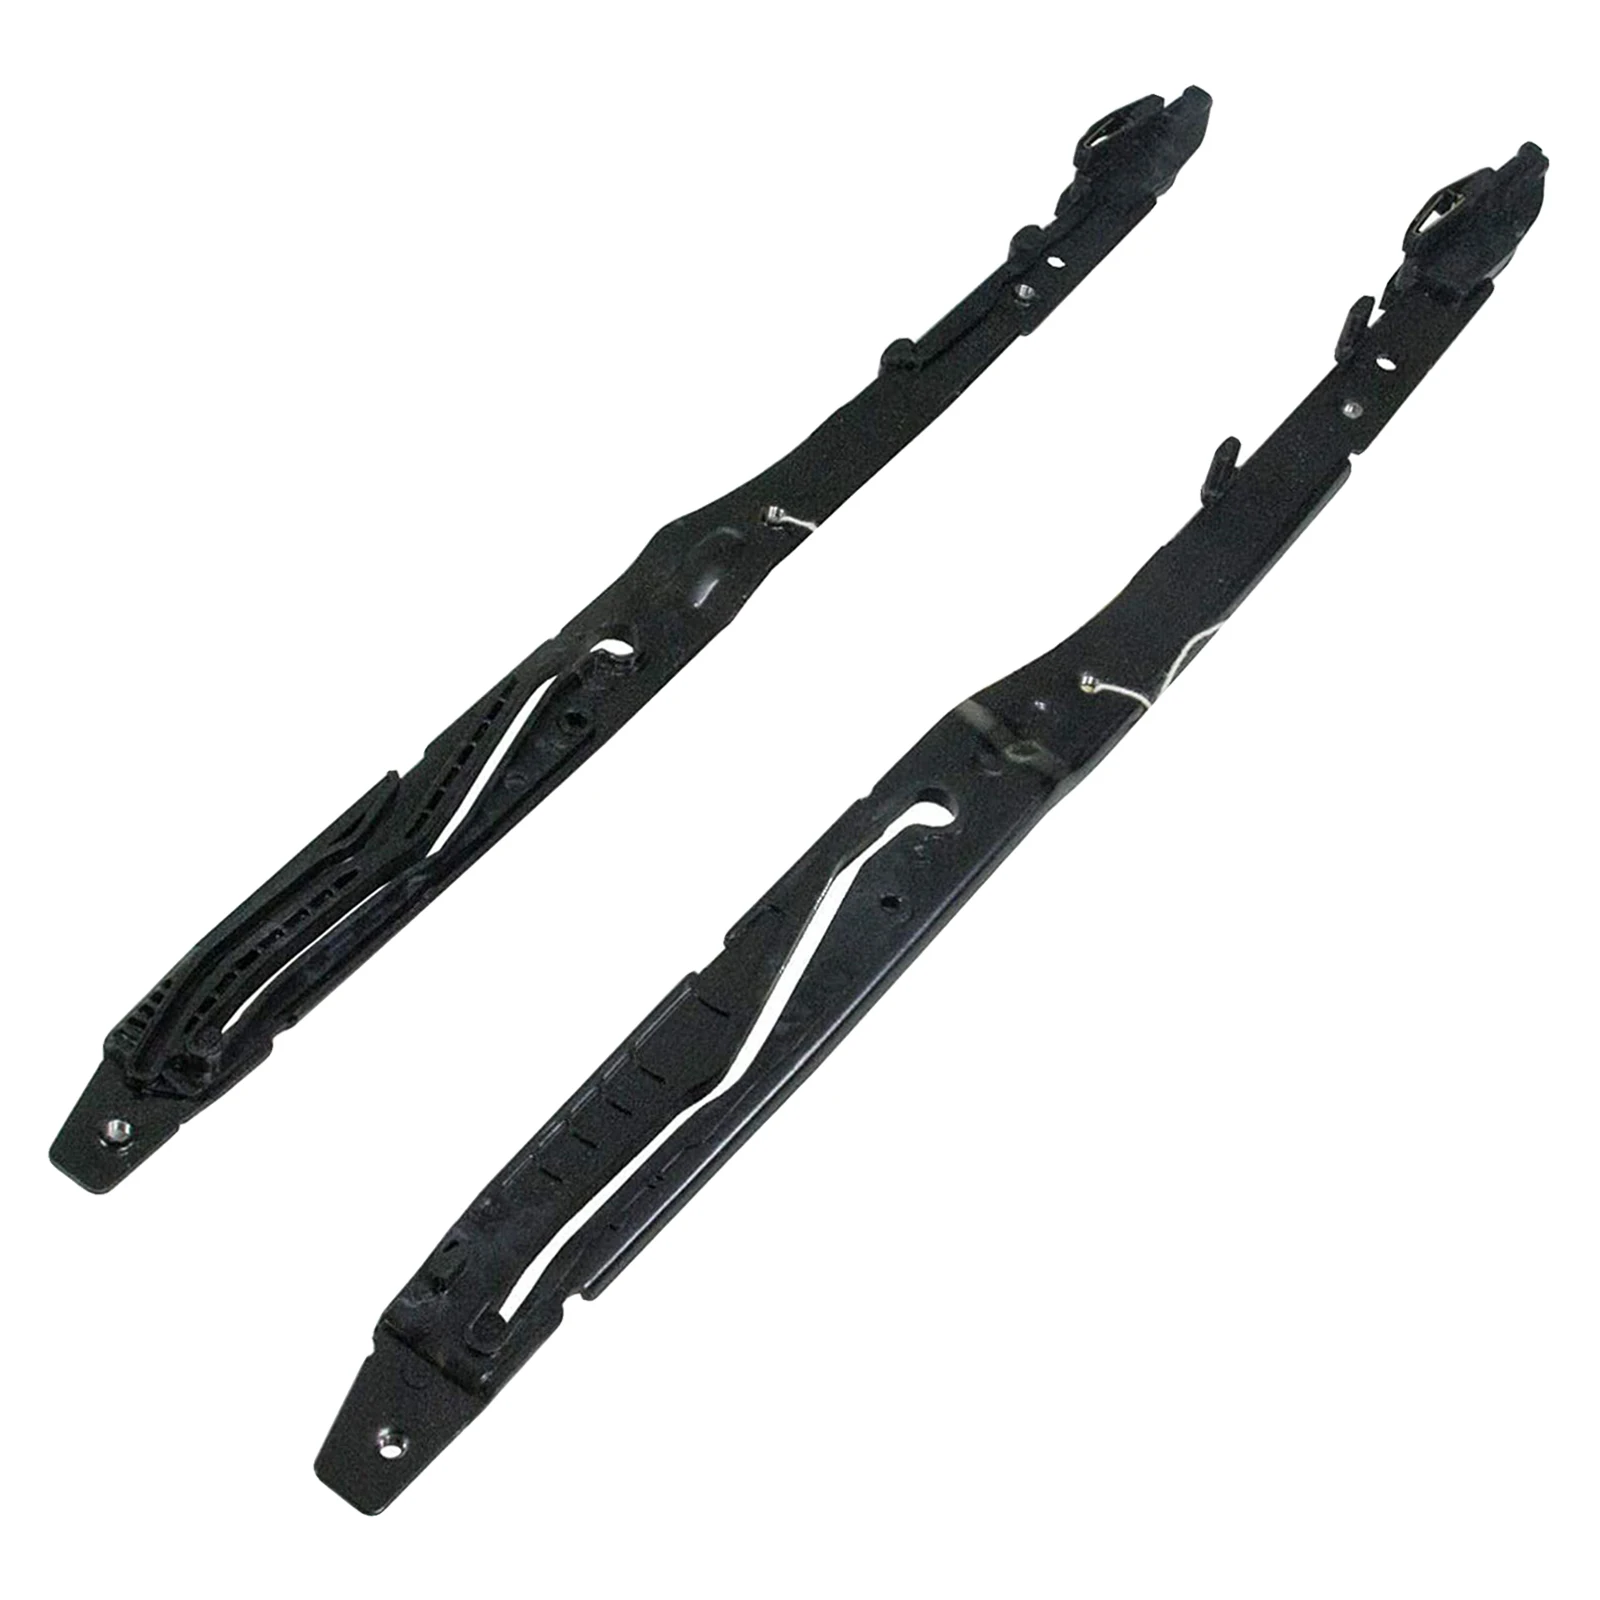 Vehicle 2Pcs Sunroof Track Assembly Repair Kit FL3Z-1651071-A for Ford F250 F350 F450 2017-2019, Durable Premium Material